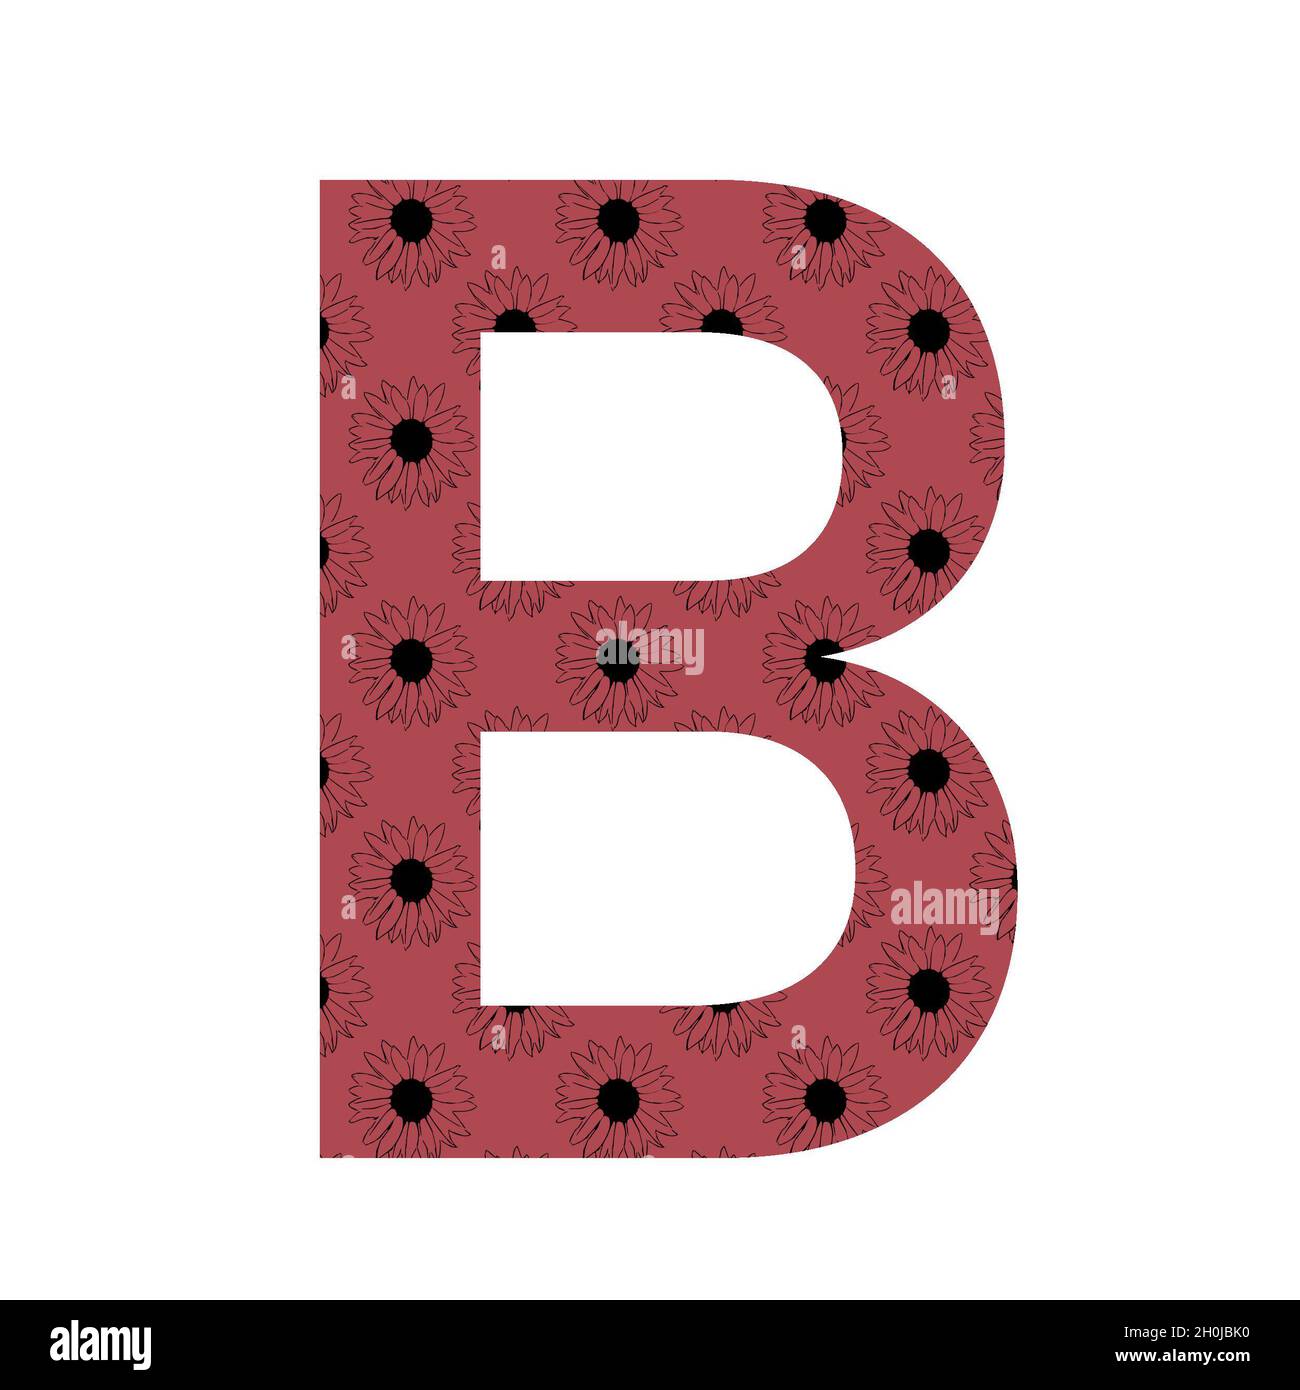 Letter B of the alphabet made with a pattern of sunflowers with a dark pink background, isolated on a white background Stock Photo